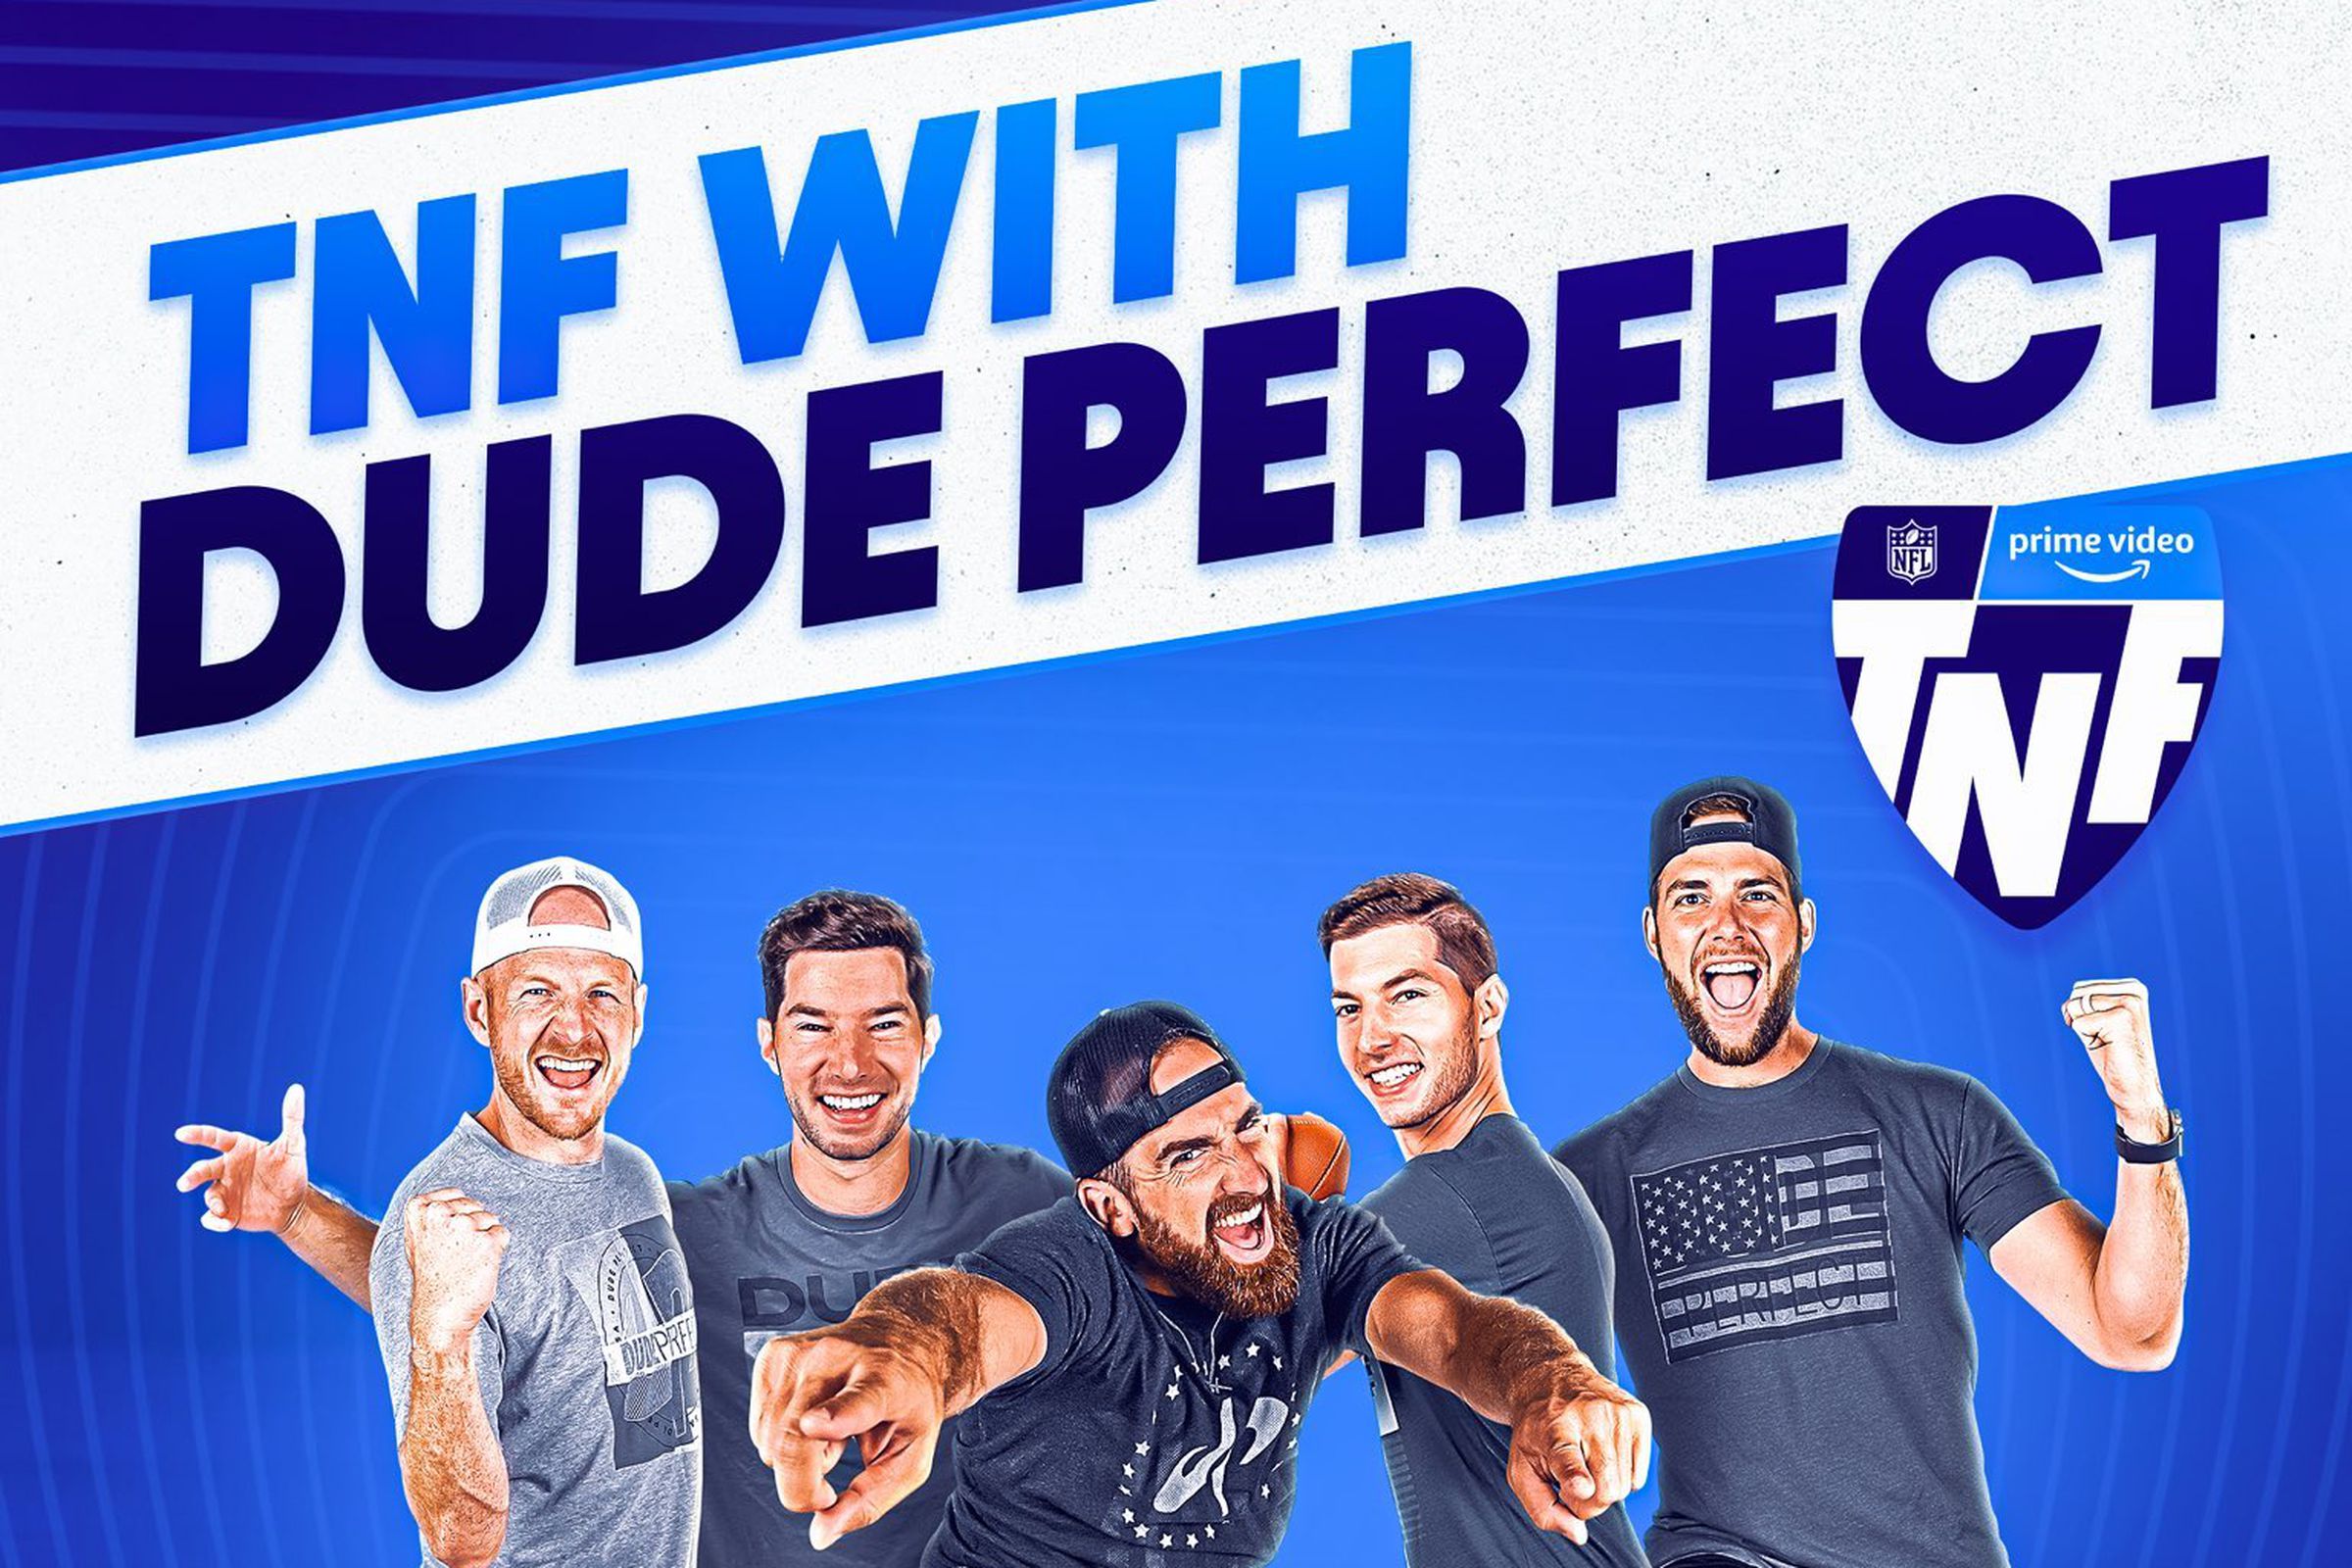 Dude Perfect is just one of the "multiple" alternate streams that will be available.